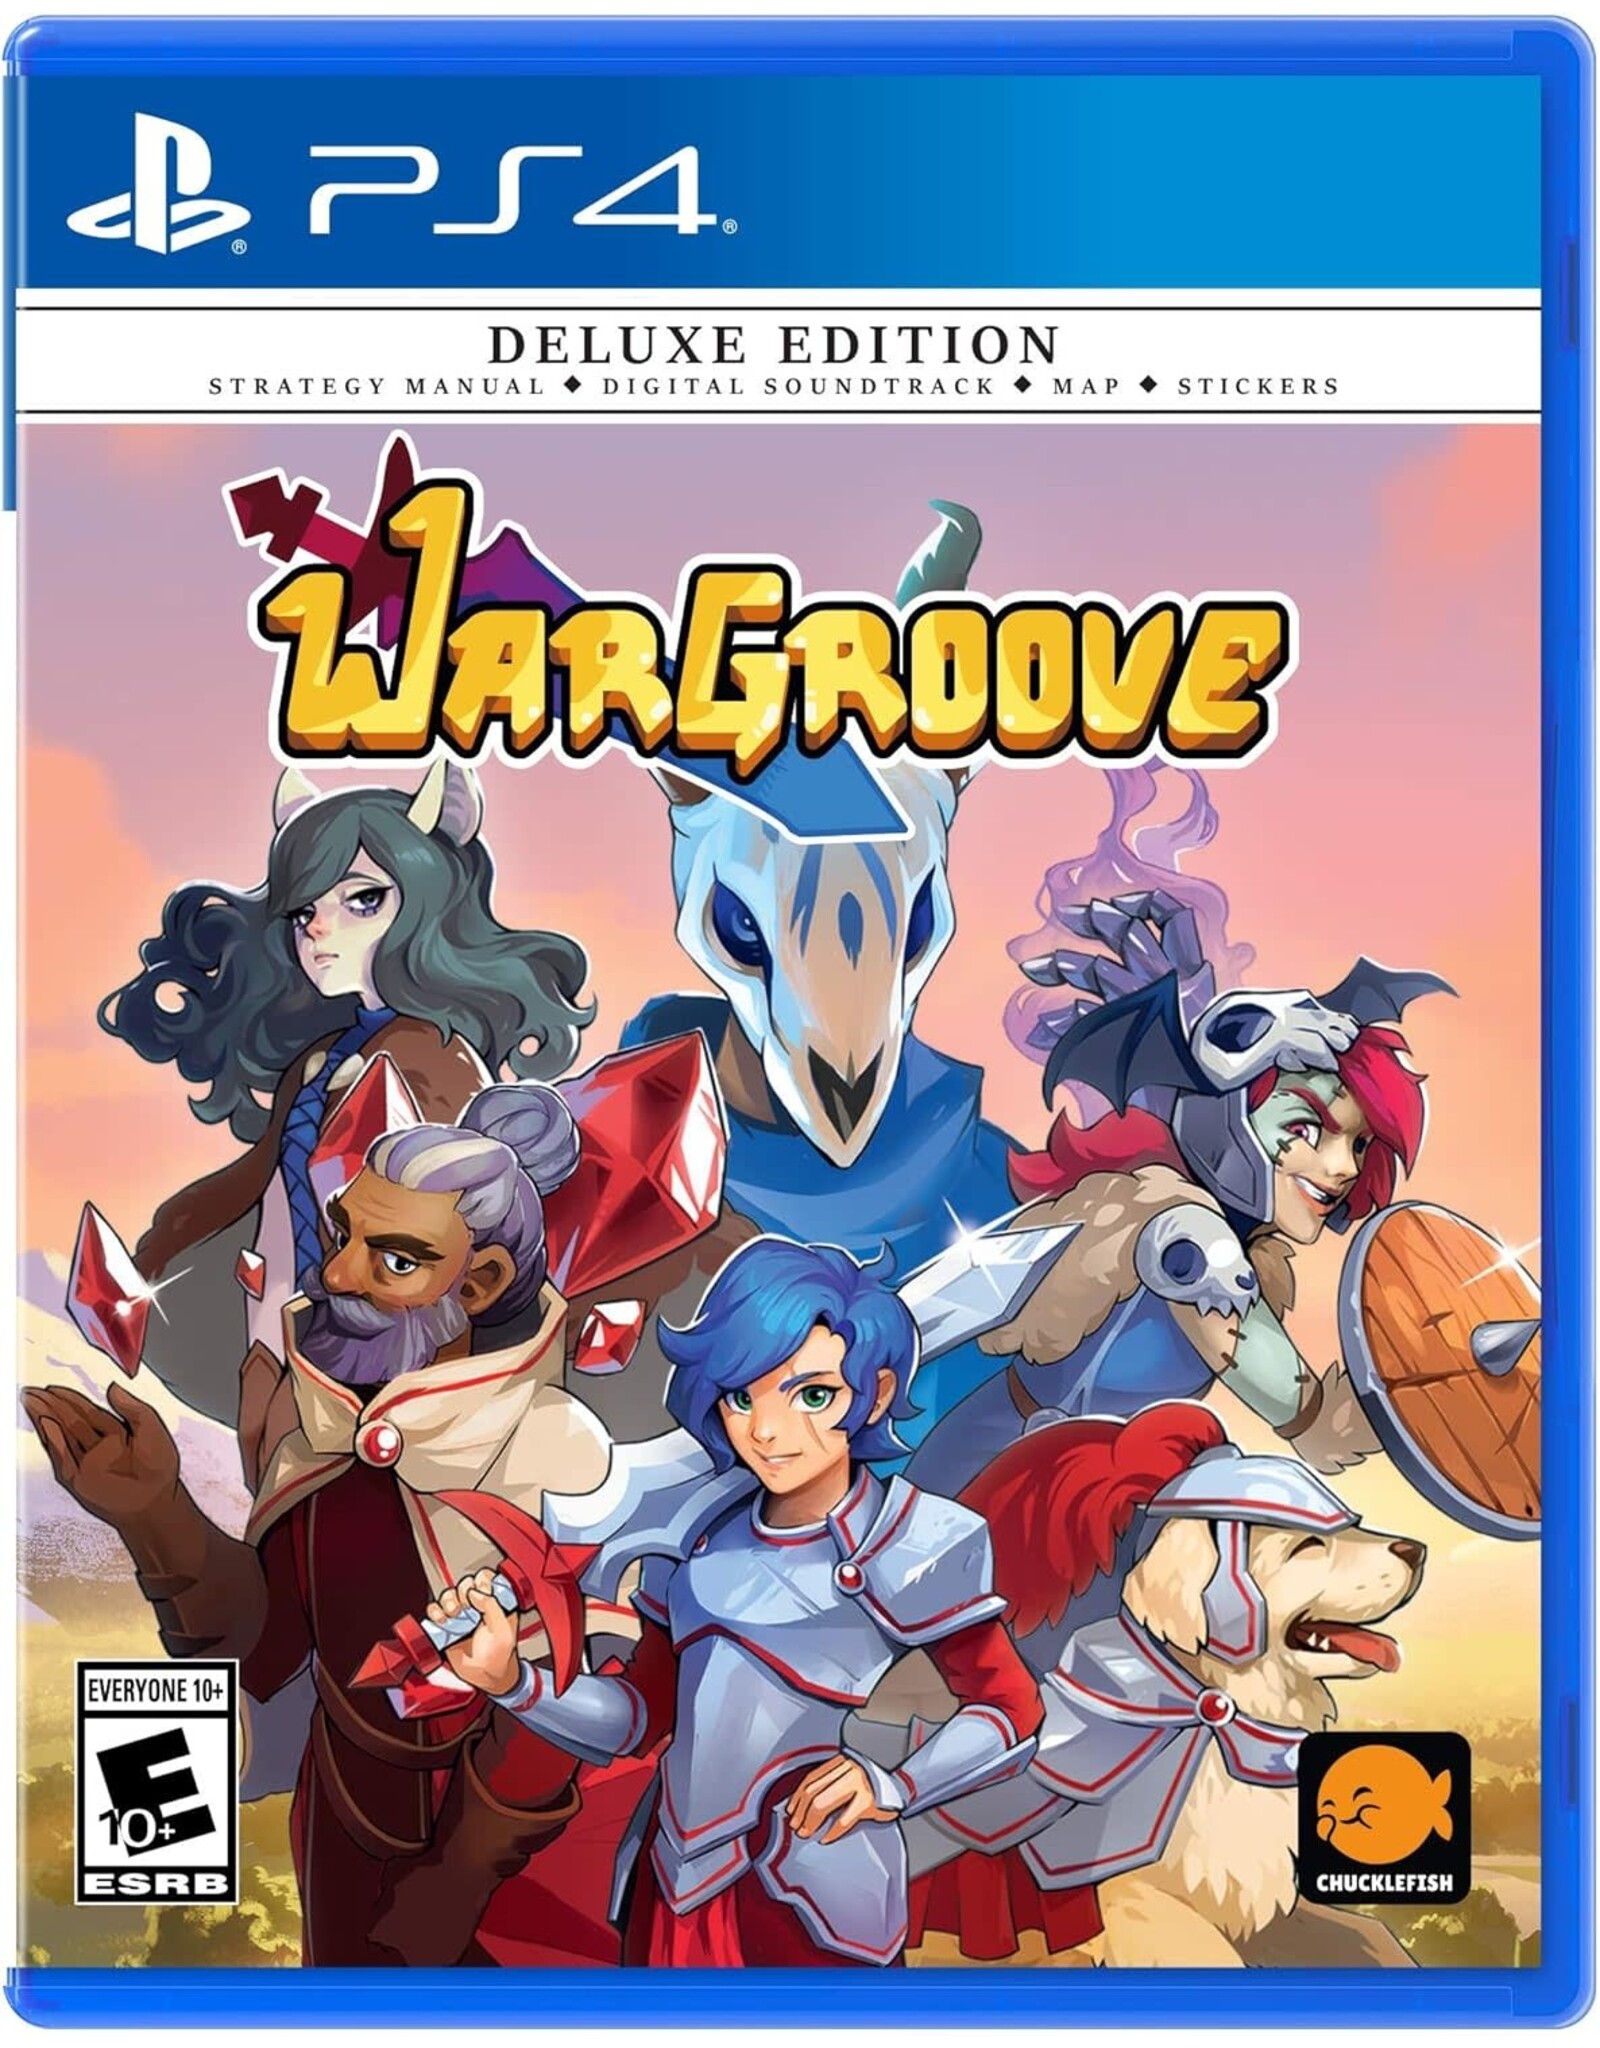 Playstation 4 WarGroove Deluxe Edition - NO DLC (Used)